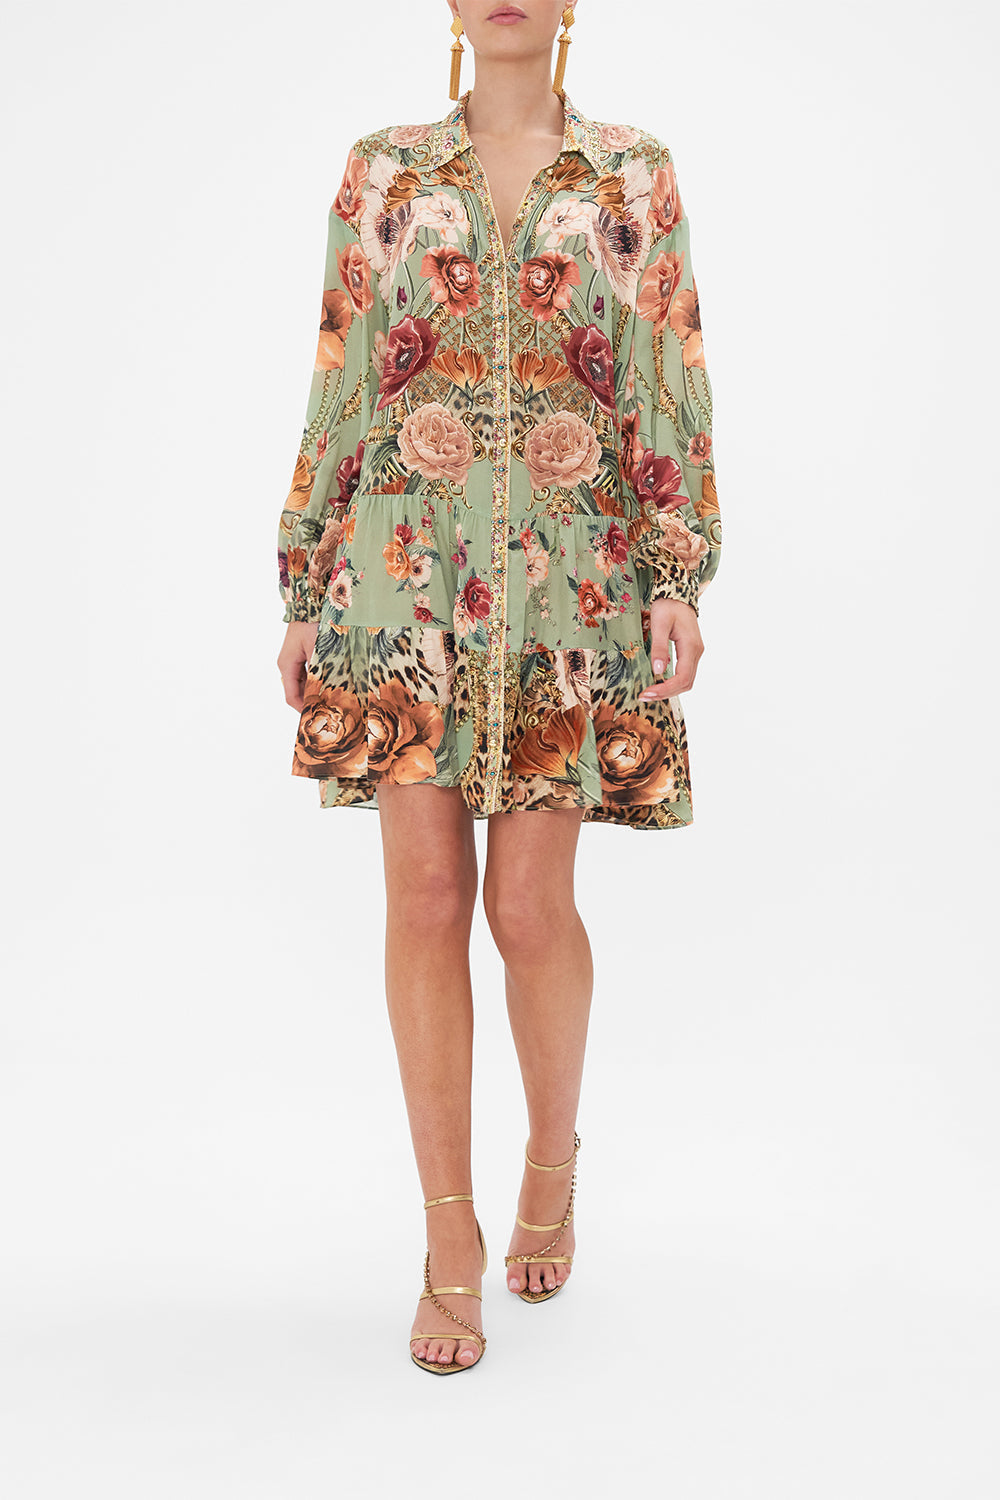 Front view of model wearing CAMILLA floral shirt dress in Grow And Glow print